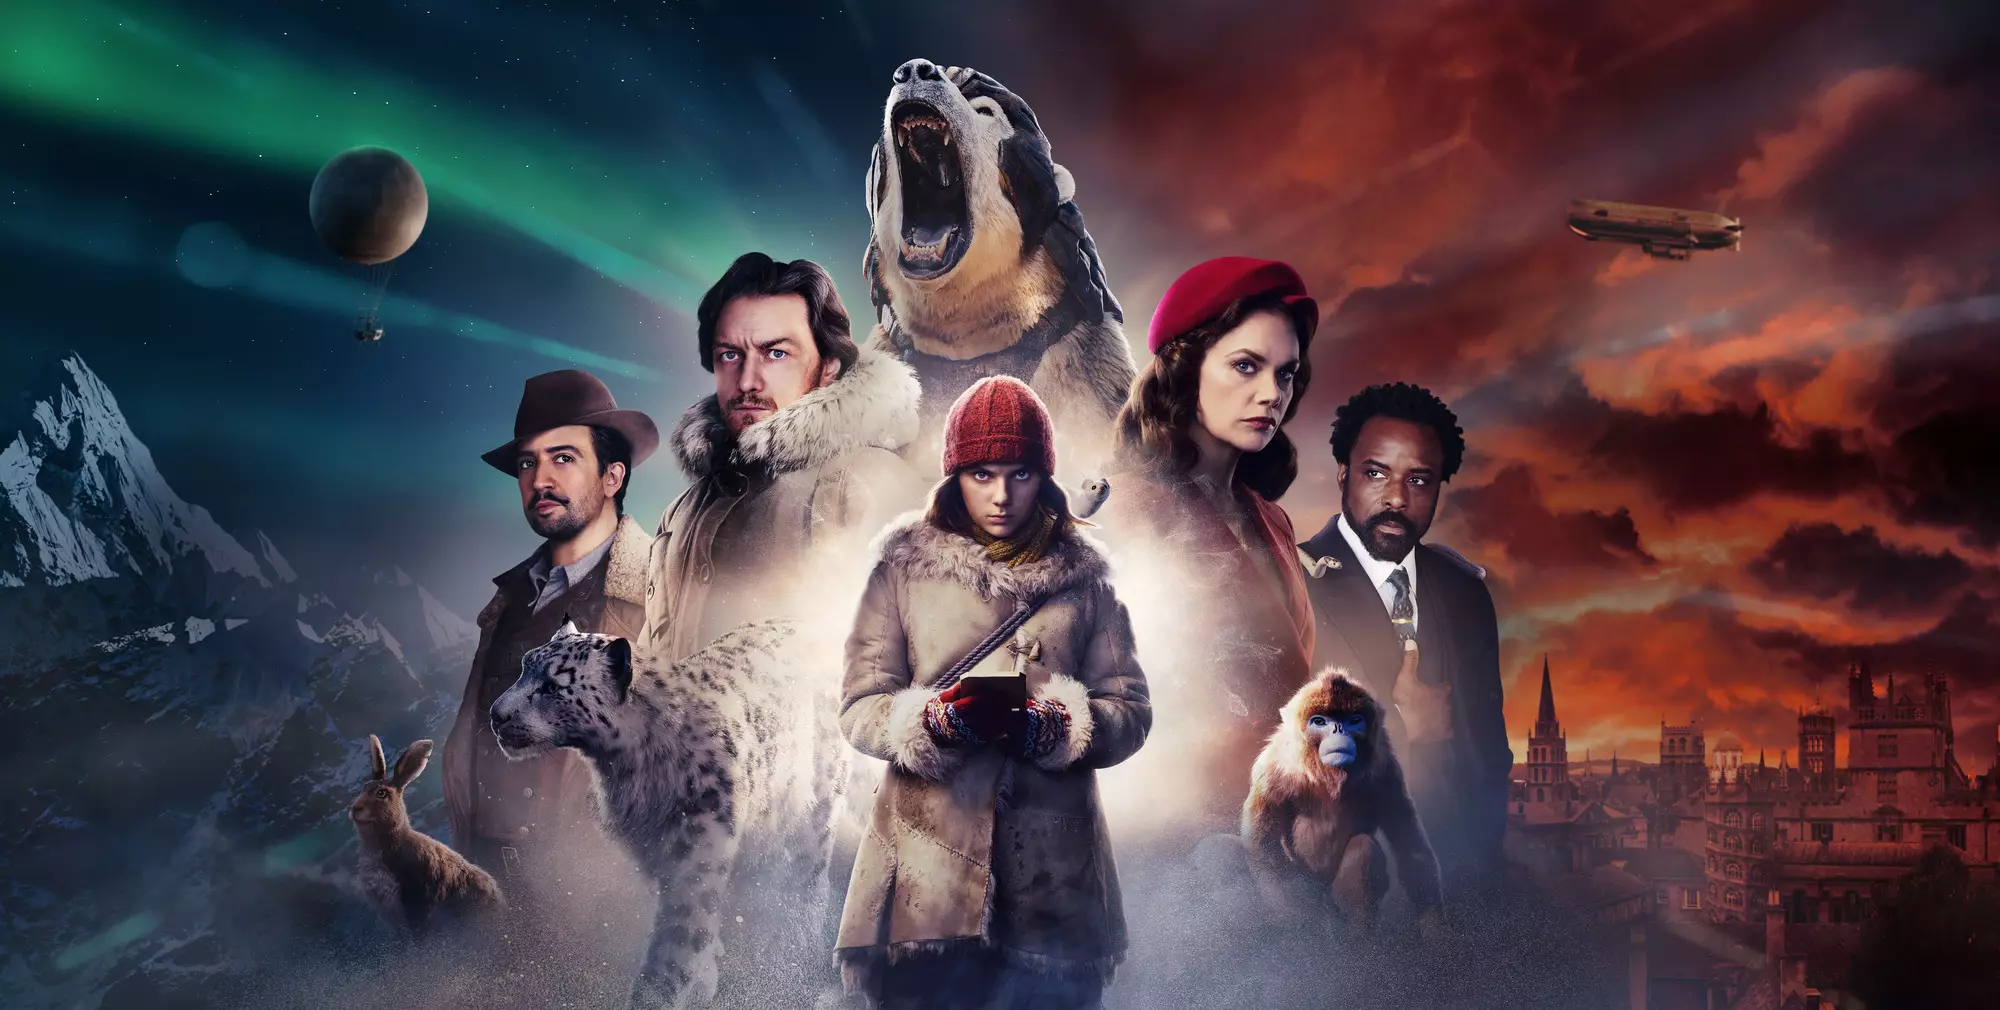 BBC's mega-budget adaptation of Philip Pullman's 'His Dark Materials' has been heaped with praise (